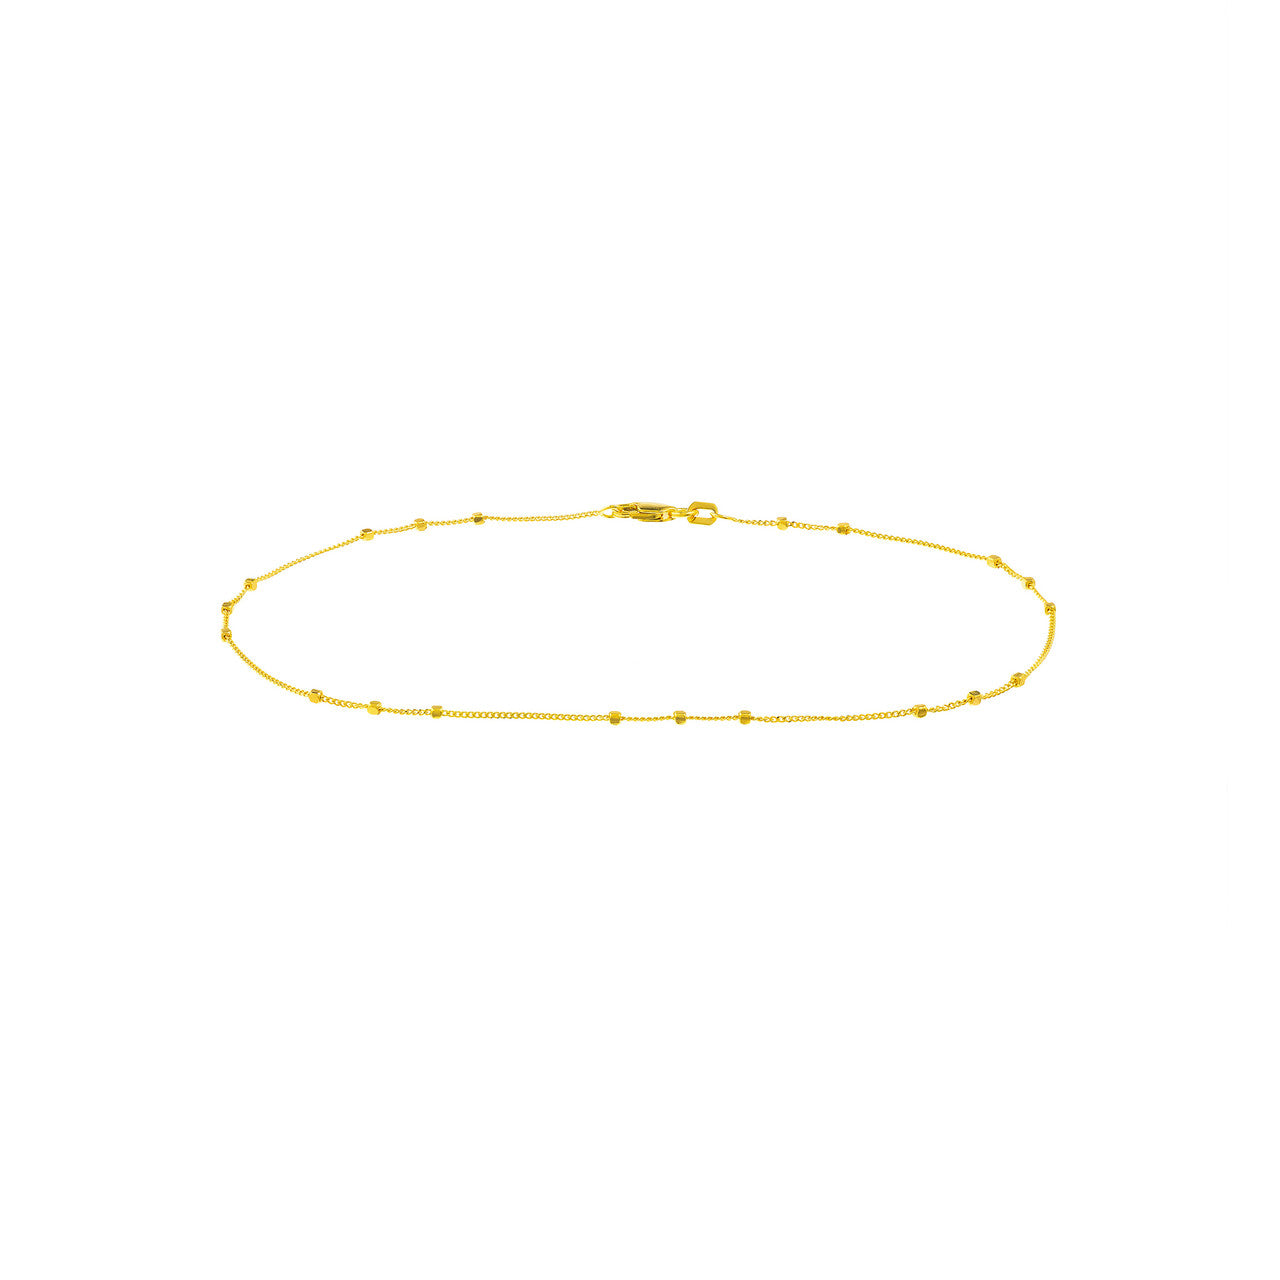 Triple Bead Gold Anklet